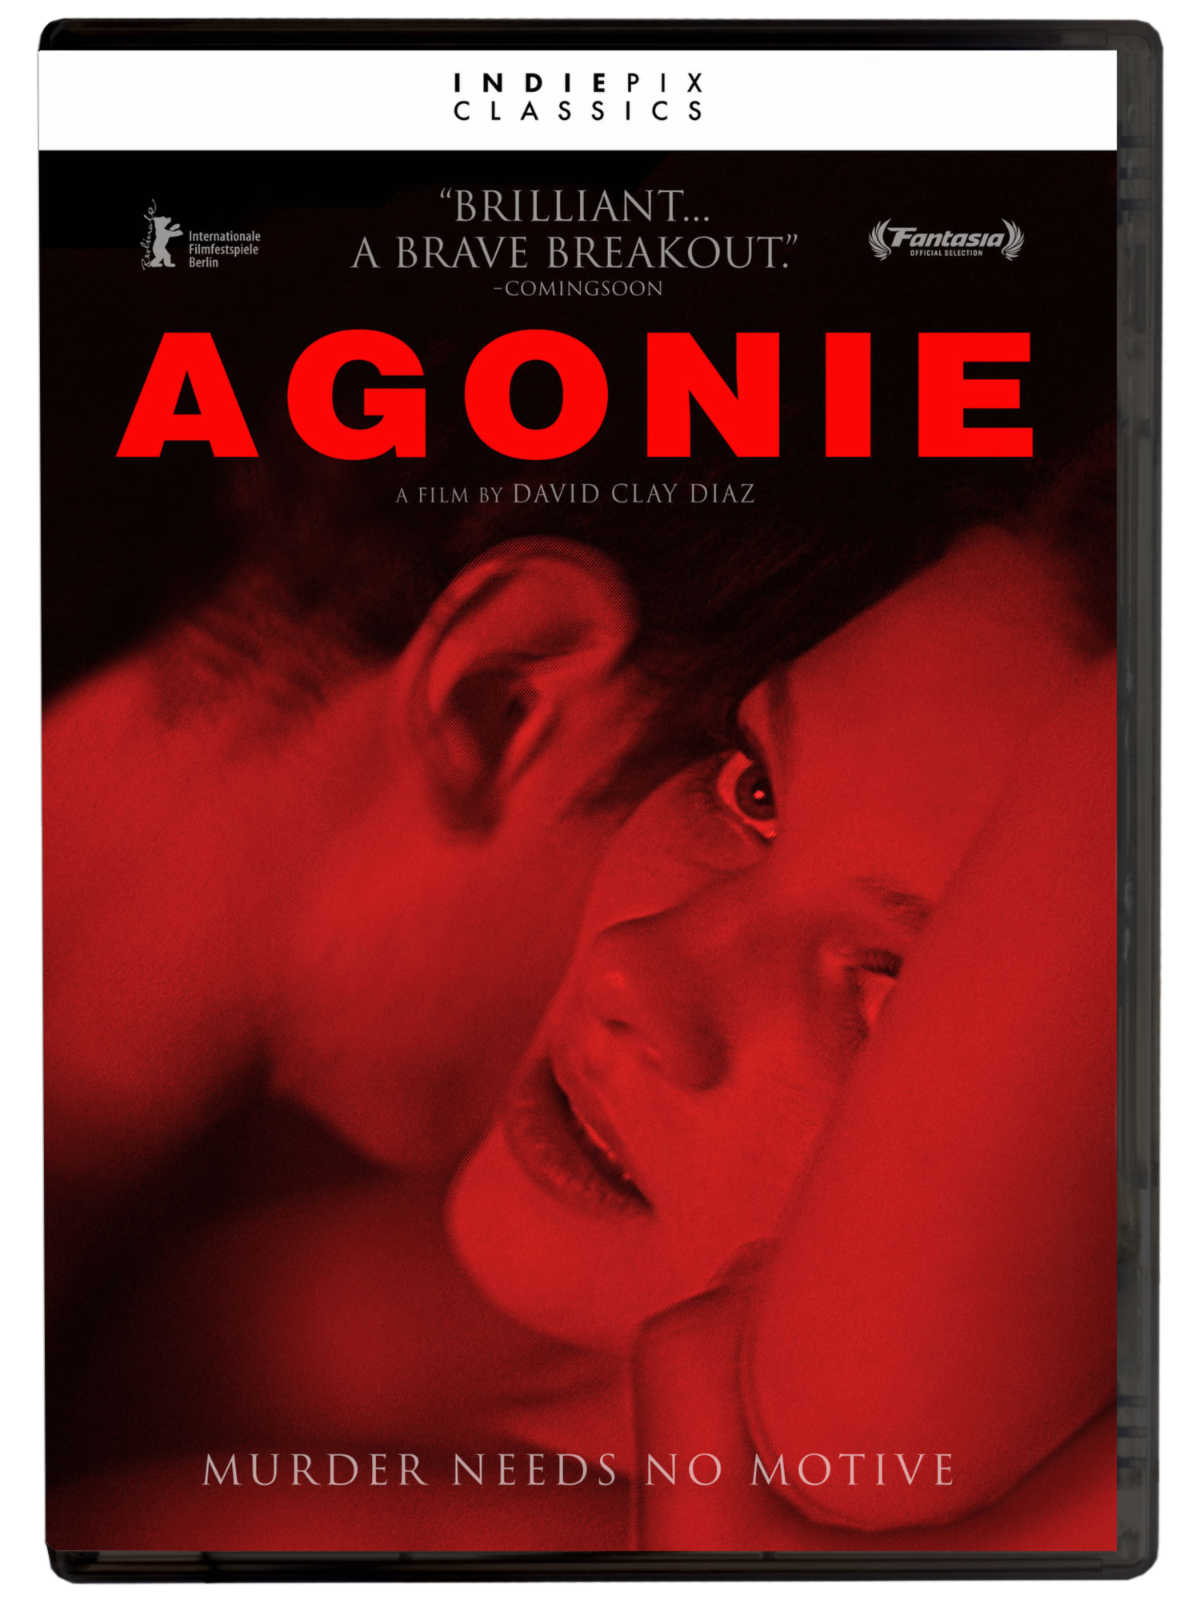 Indulge in a suspenseful drama with Agonie, a film based on a true Viennese murder. A university student is found dismembered, and two young men become suspects. With a dark atmosphere, superb acting, and a driving soundtrack, Agonie will keep you on the edge of your seat.